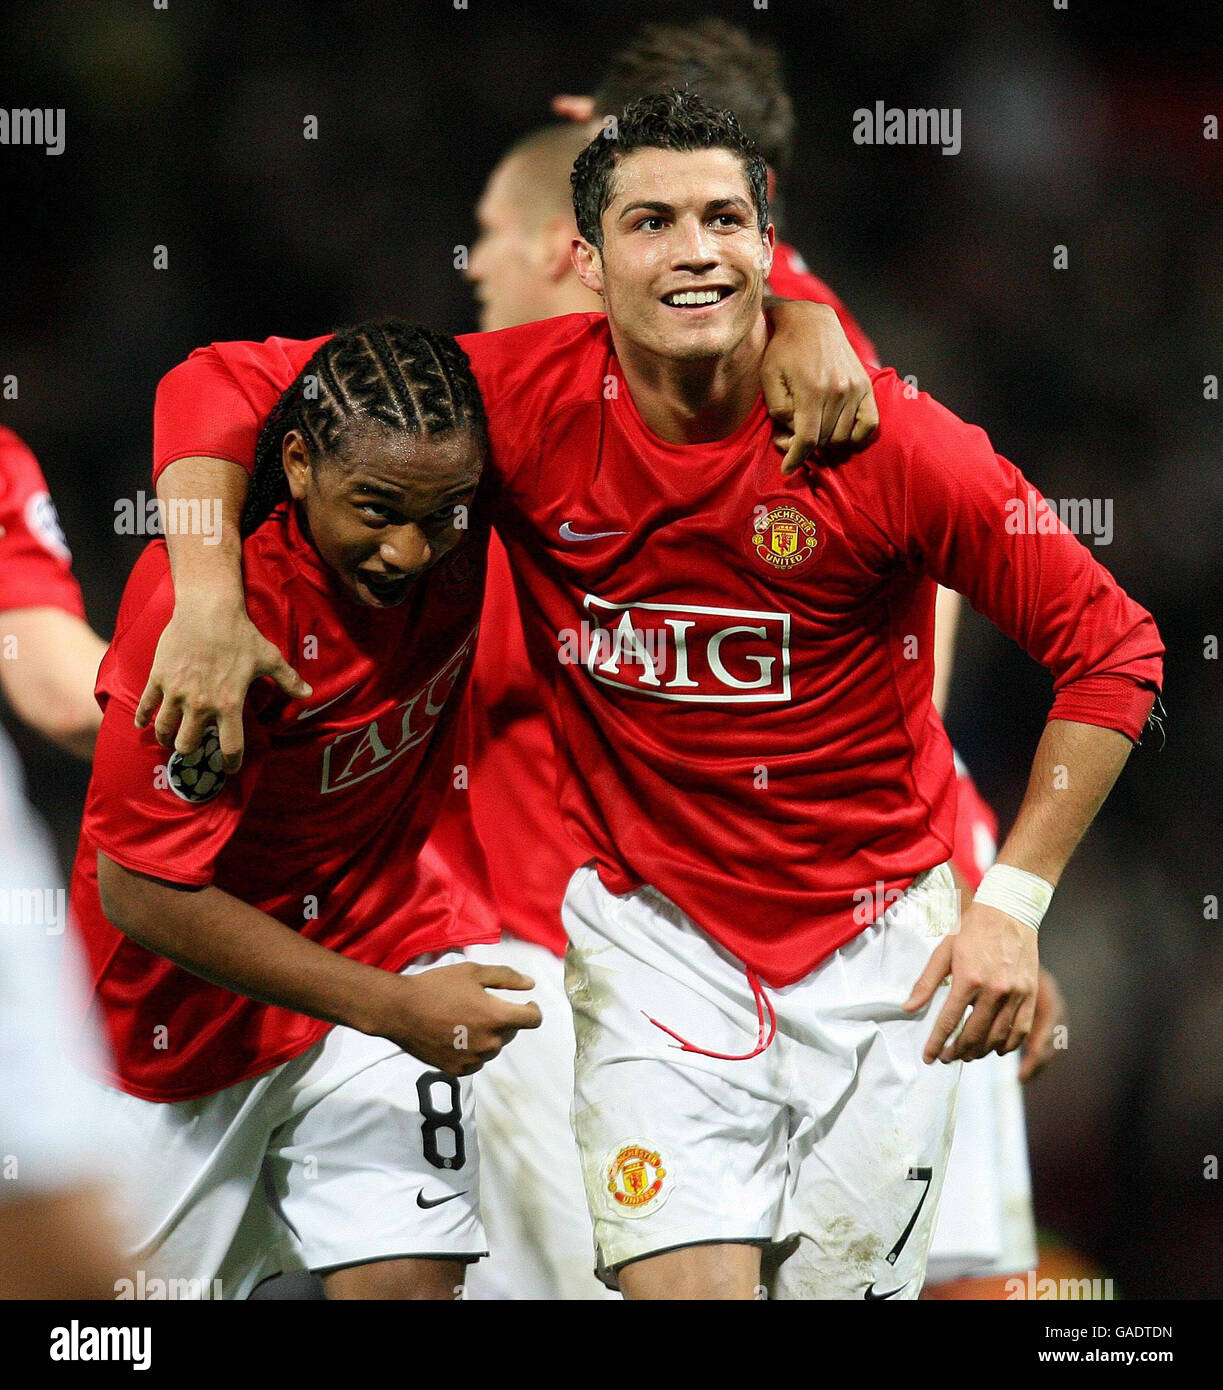 Manchester United's Cristiano Ronaldo celebrates his goal with Anderson  (left) during the UEFA Champions League match at Old Trafford, Manchester  Stock Photo - Alamy